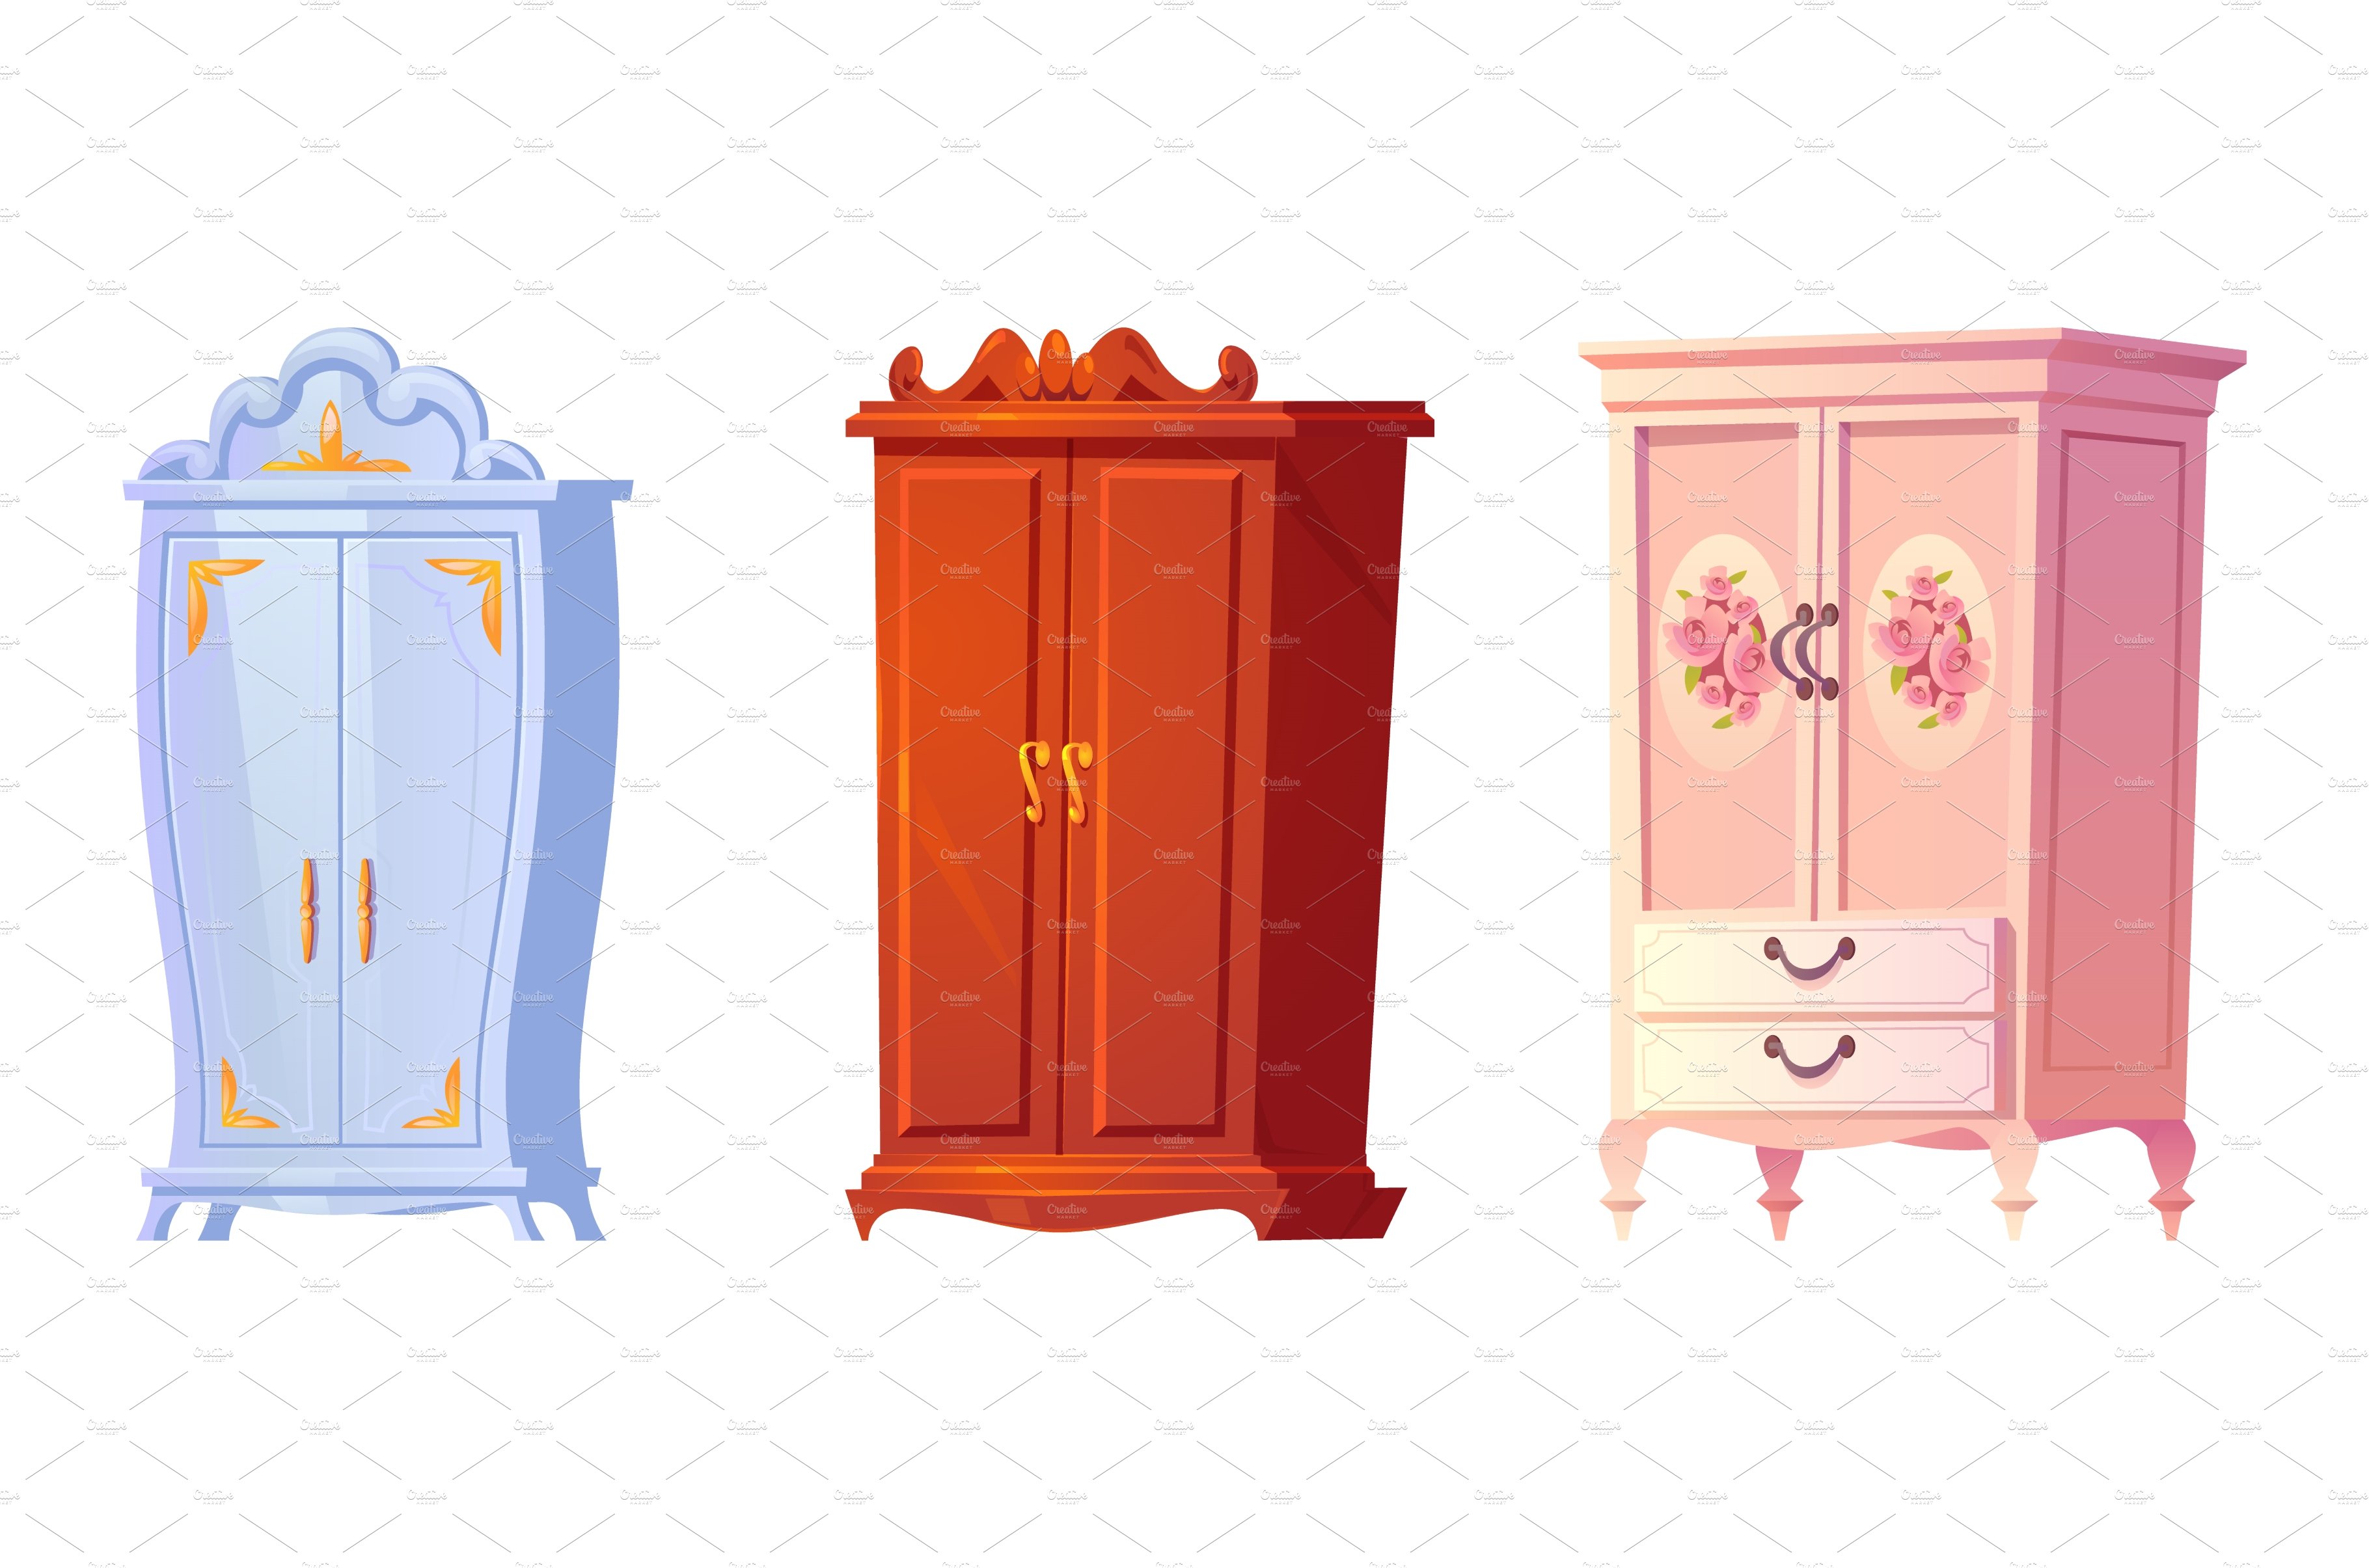 Cartoon cupboards baroque, shabby cover image.